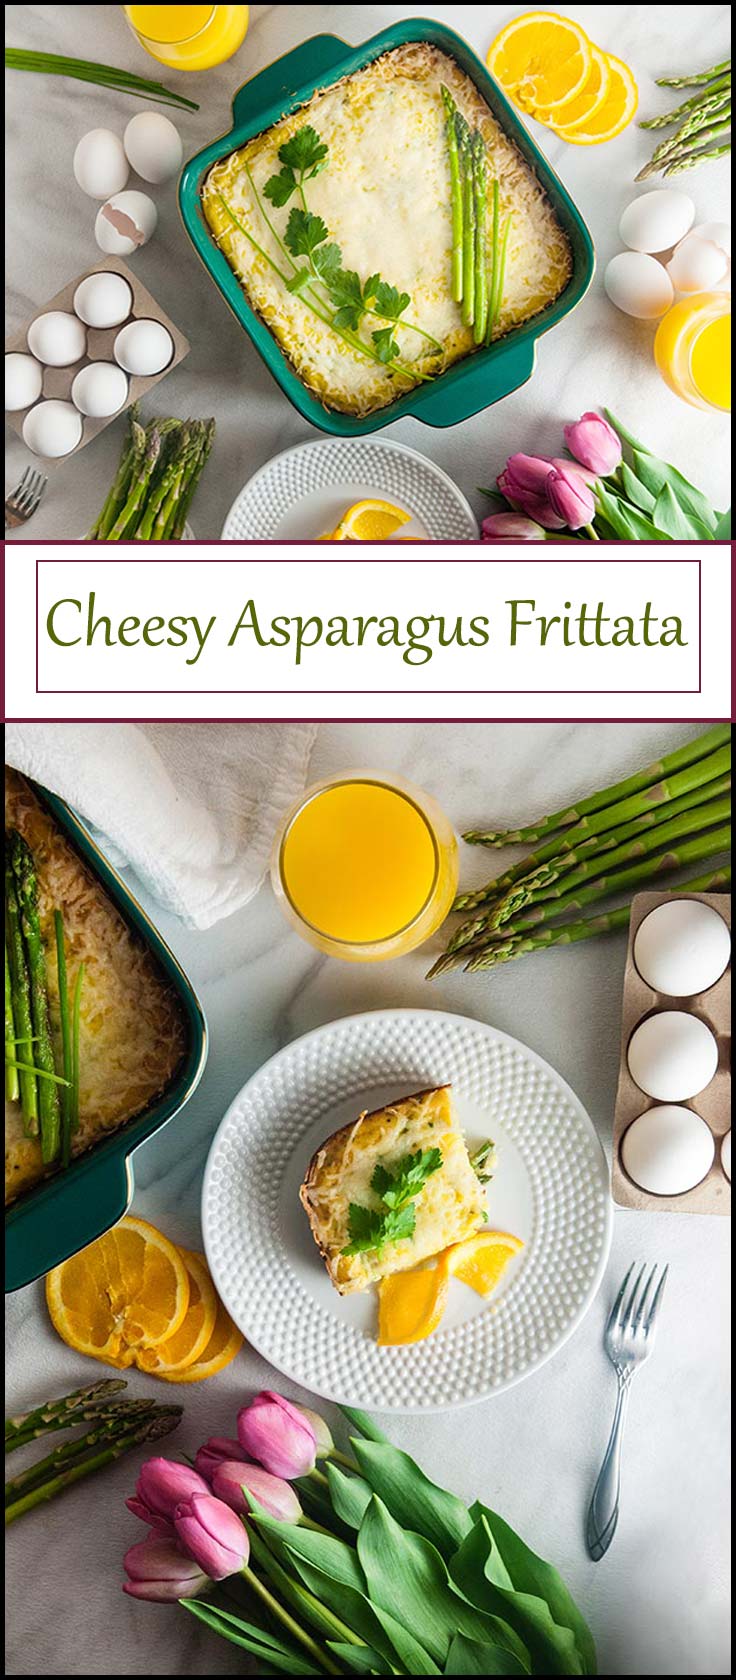 Cheesy asparagus frittata is a an easy breakfast casserole perfect for Easter brunch. This vegetarian breakfast casserole will please everyone from www.seasonedsprinkles.com